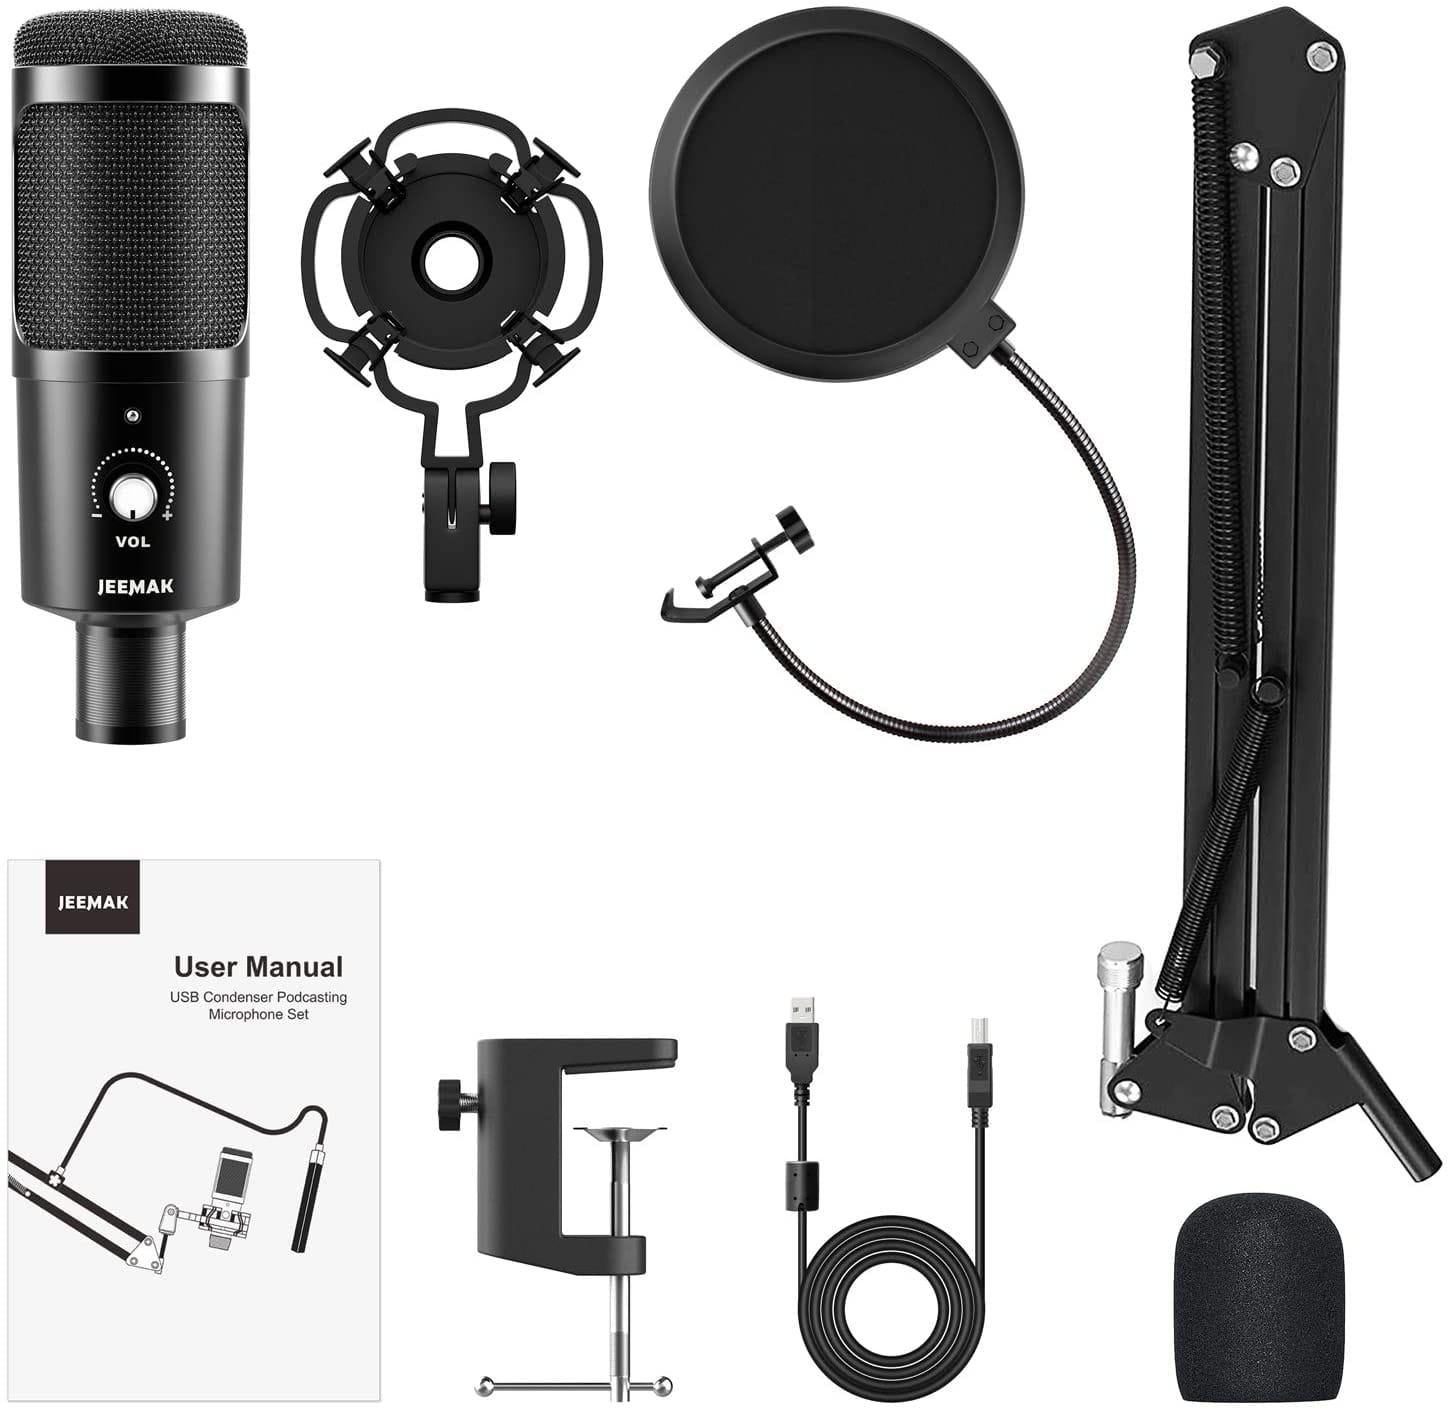 Jeemak PC20 USB Microphone Kit for Computer Microphone Set (USA ONLY)